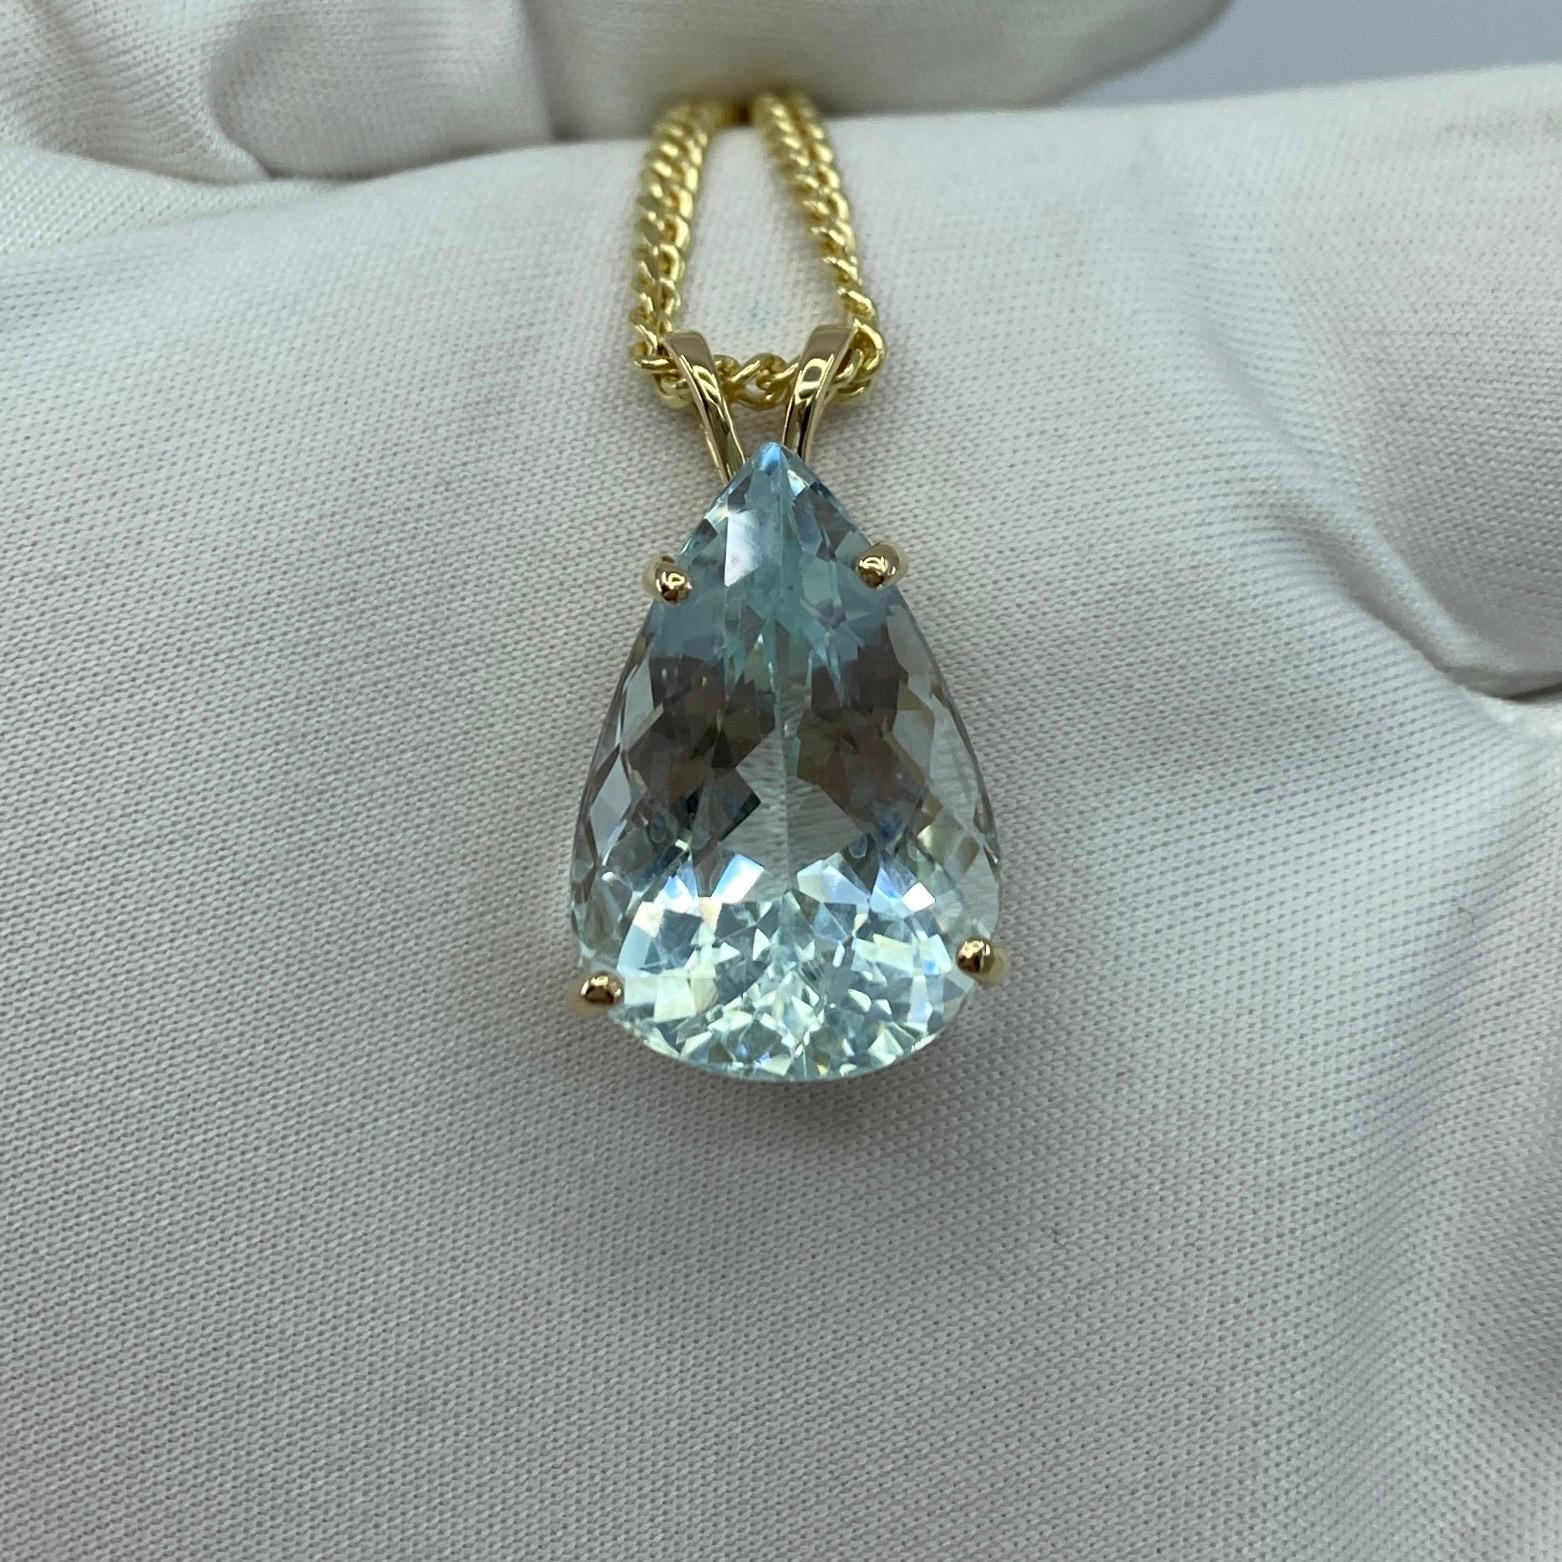 Large Fine Natural Blue Aquamarine Pendant Necklace.

12 Carat Aquamarine with a stunning bright blue colour and excellent clarity, set in a fine 14k yellow gold solitaire pendant.
The aquamarine also has an excellent pear/teardrop cut showing lots